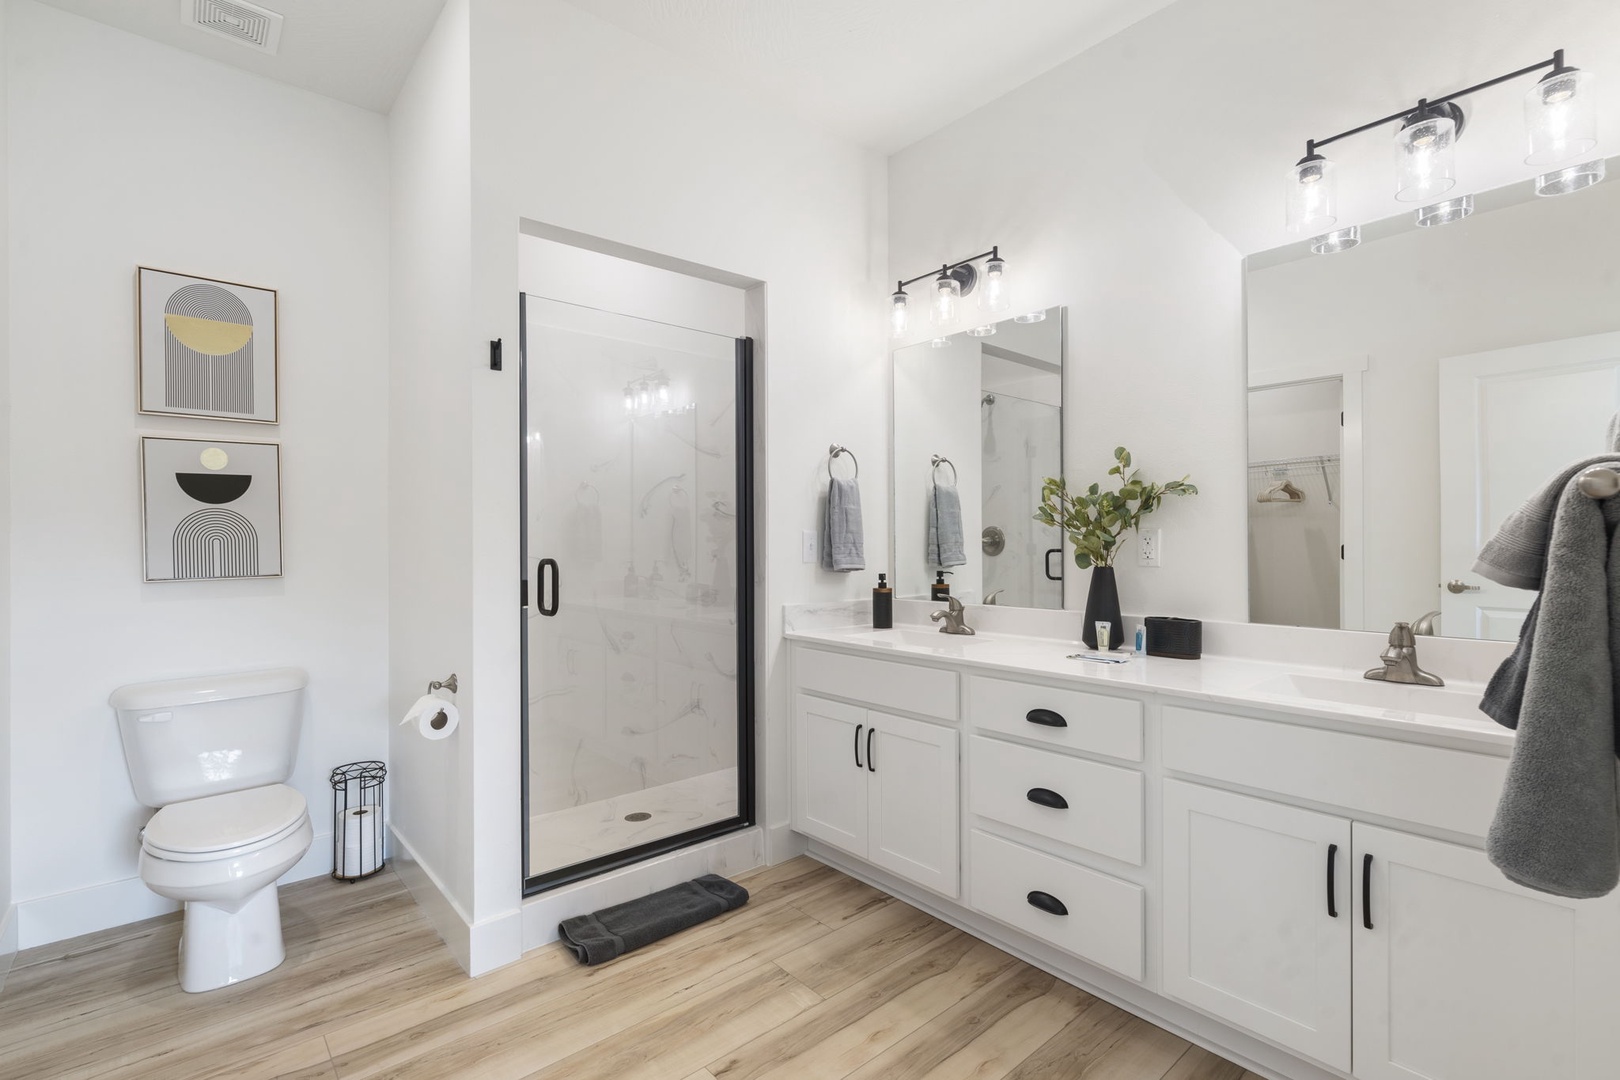 The king en suite boasts an oversized double vanity and glass shower